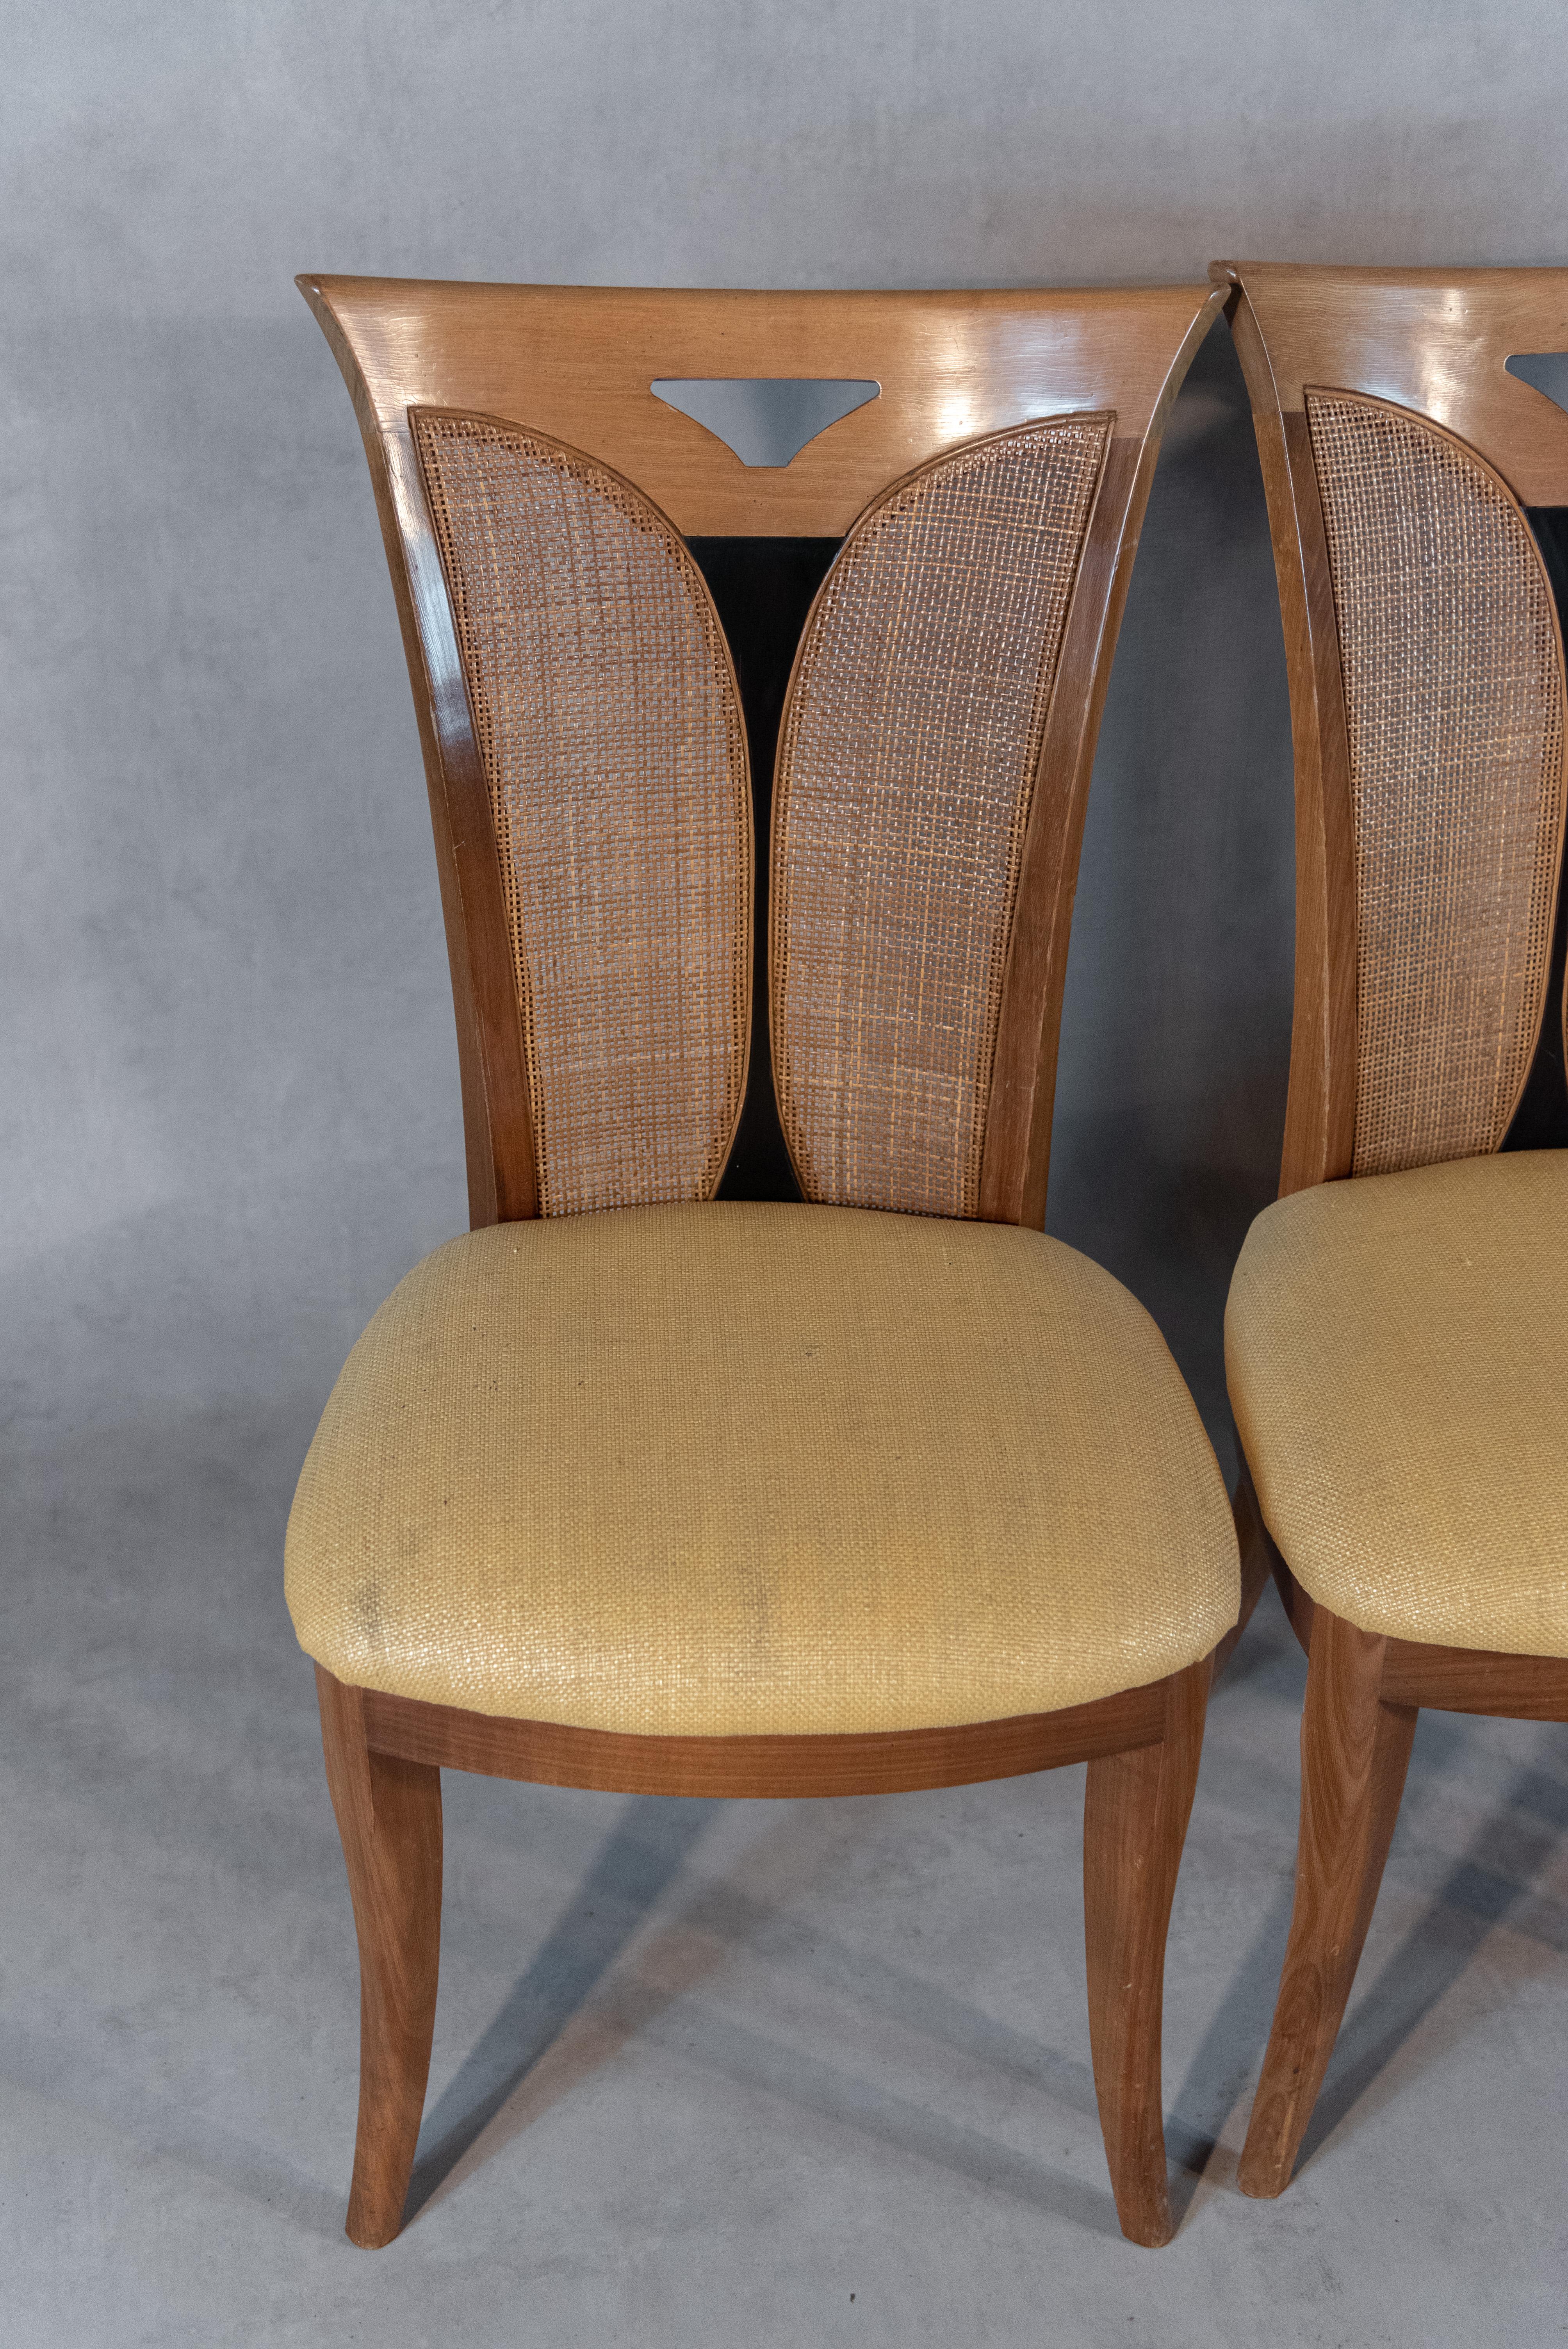 Set of six upholstered high-back chairs from the late 20th century in the style of Art Deco. They will bring a wonderful touch of originality to any home, room, or dining space.